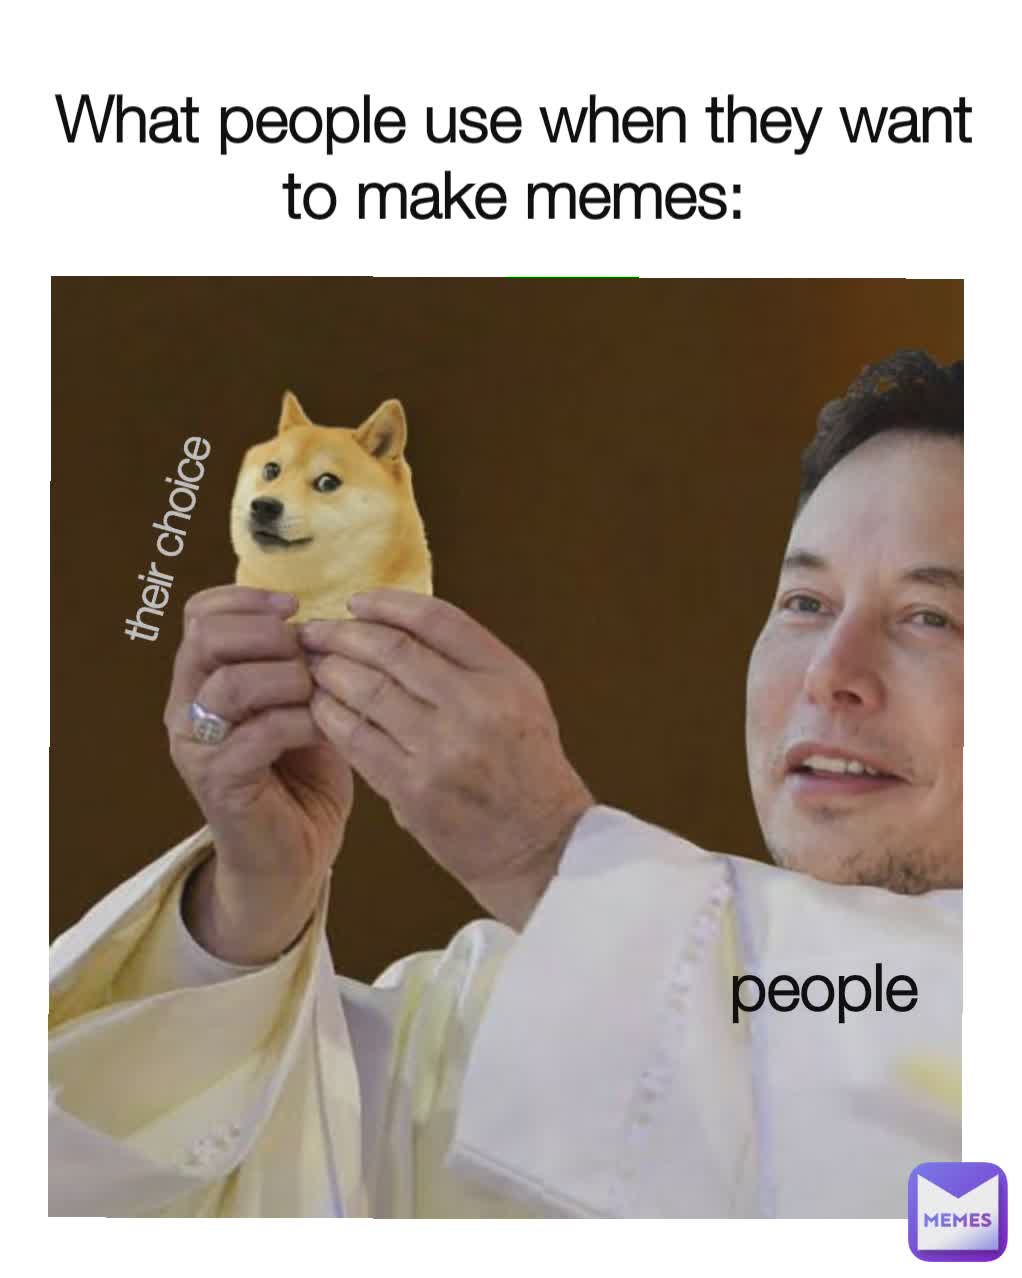 What people use when they want to make memes: people their choice